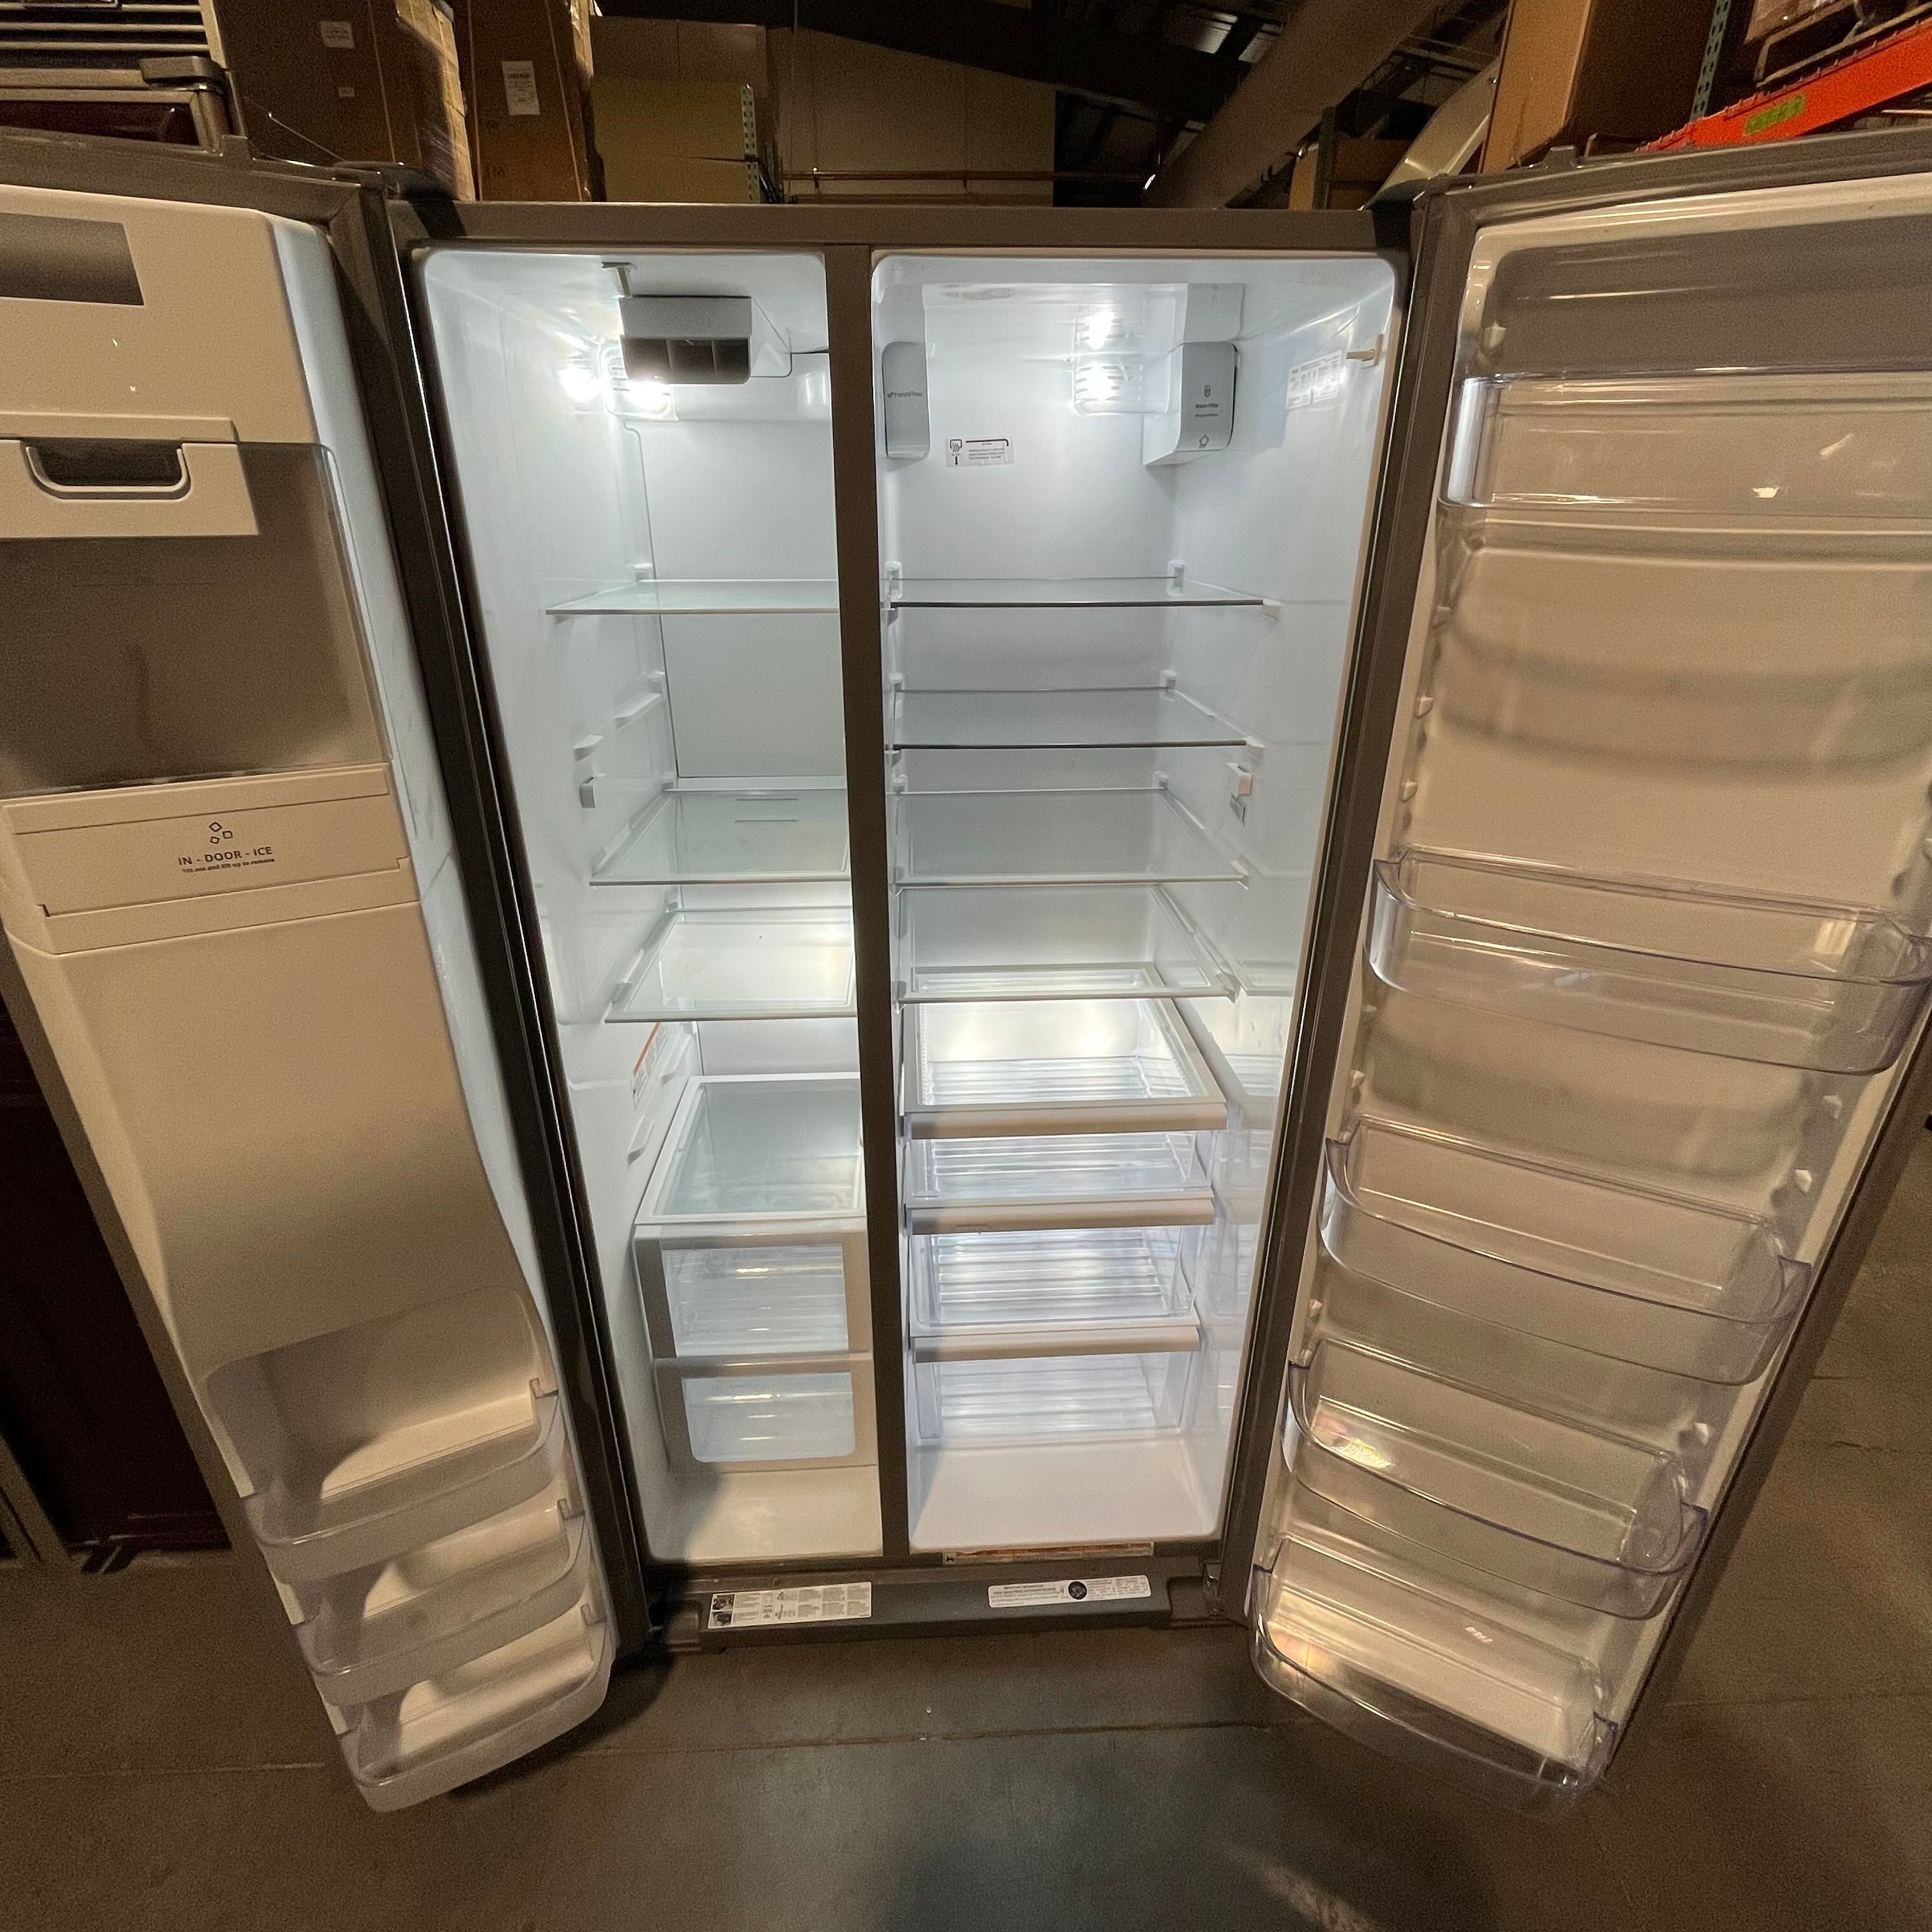 F4823 Whirlpool Side by Side Stainless Steel Refrigerator